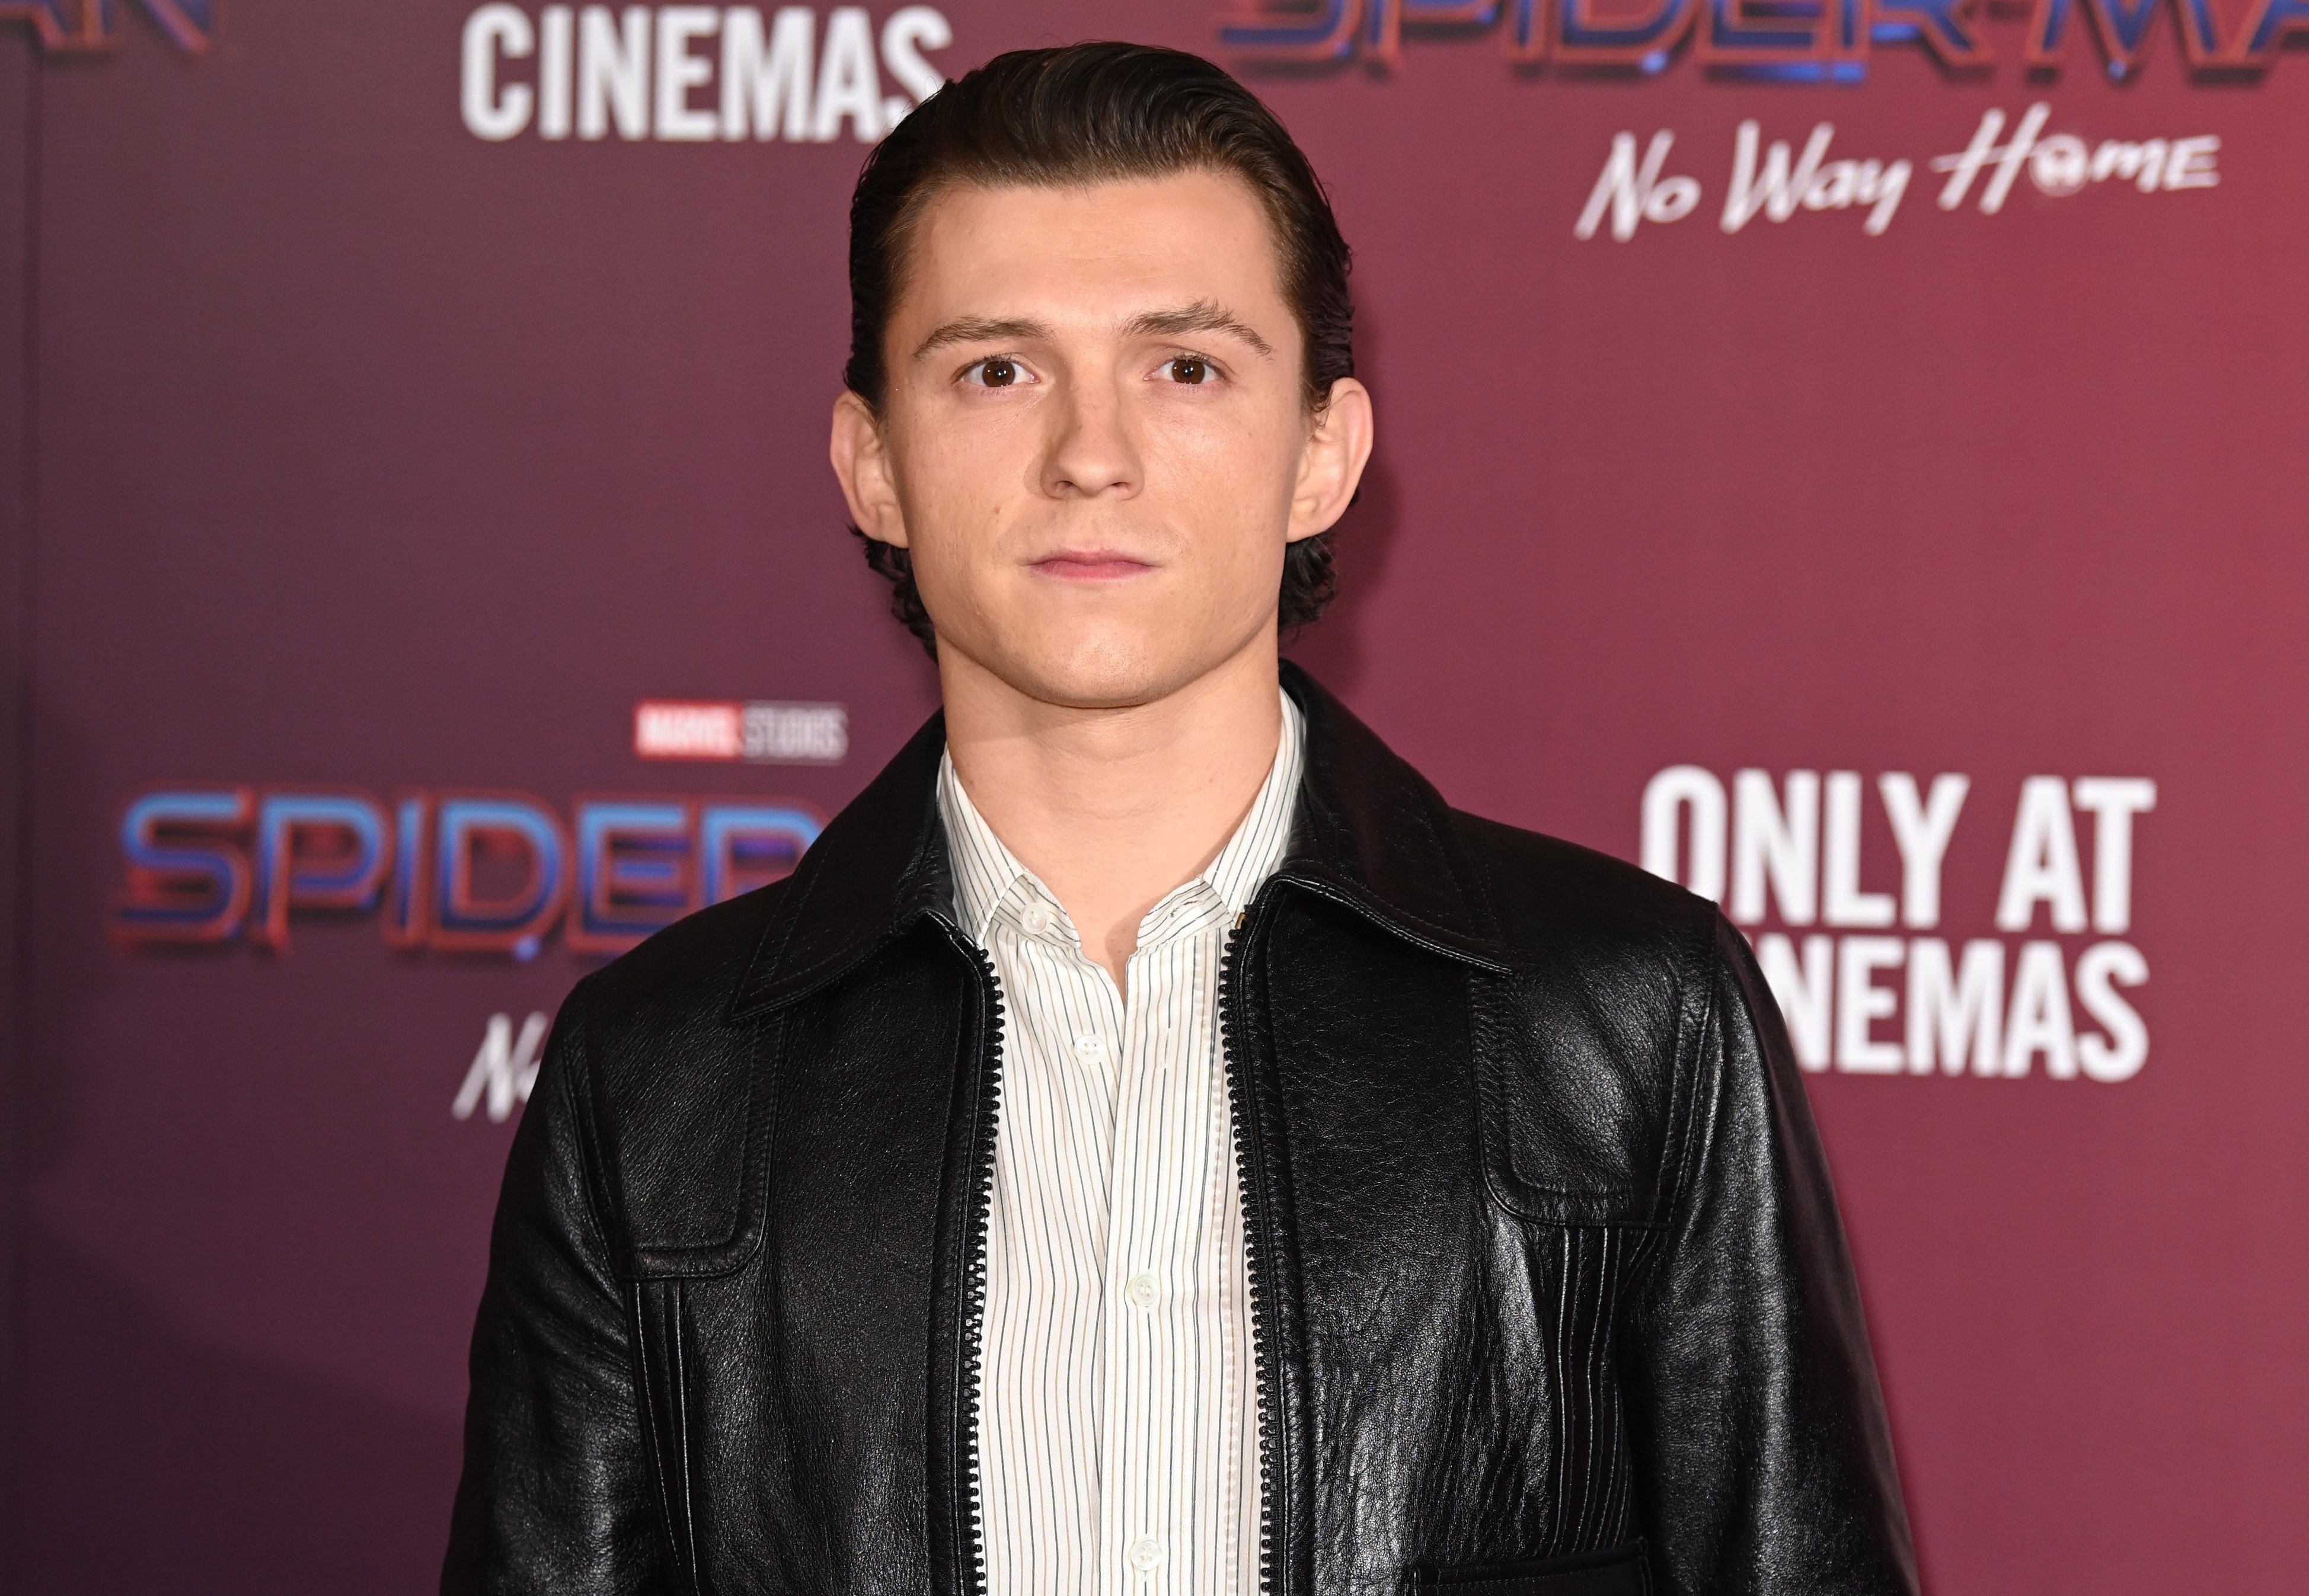 'Spider-Man: No Way Home' star Tom Holland wears a black leather jacket over a white striped button-up shirt.